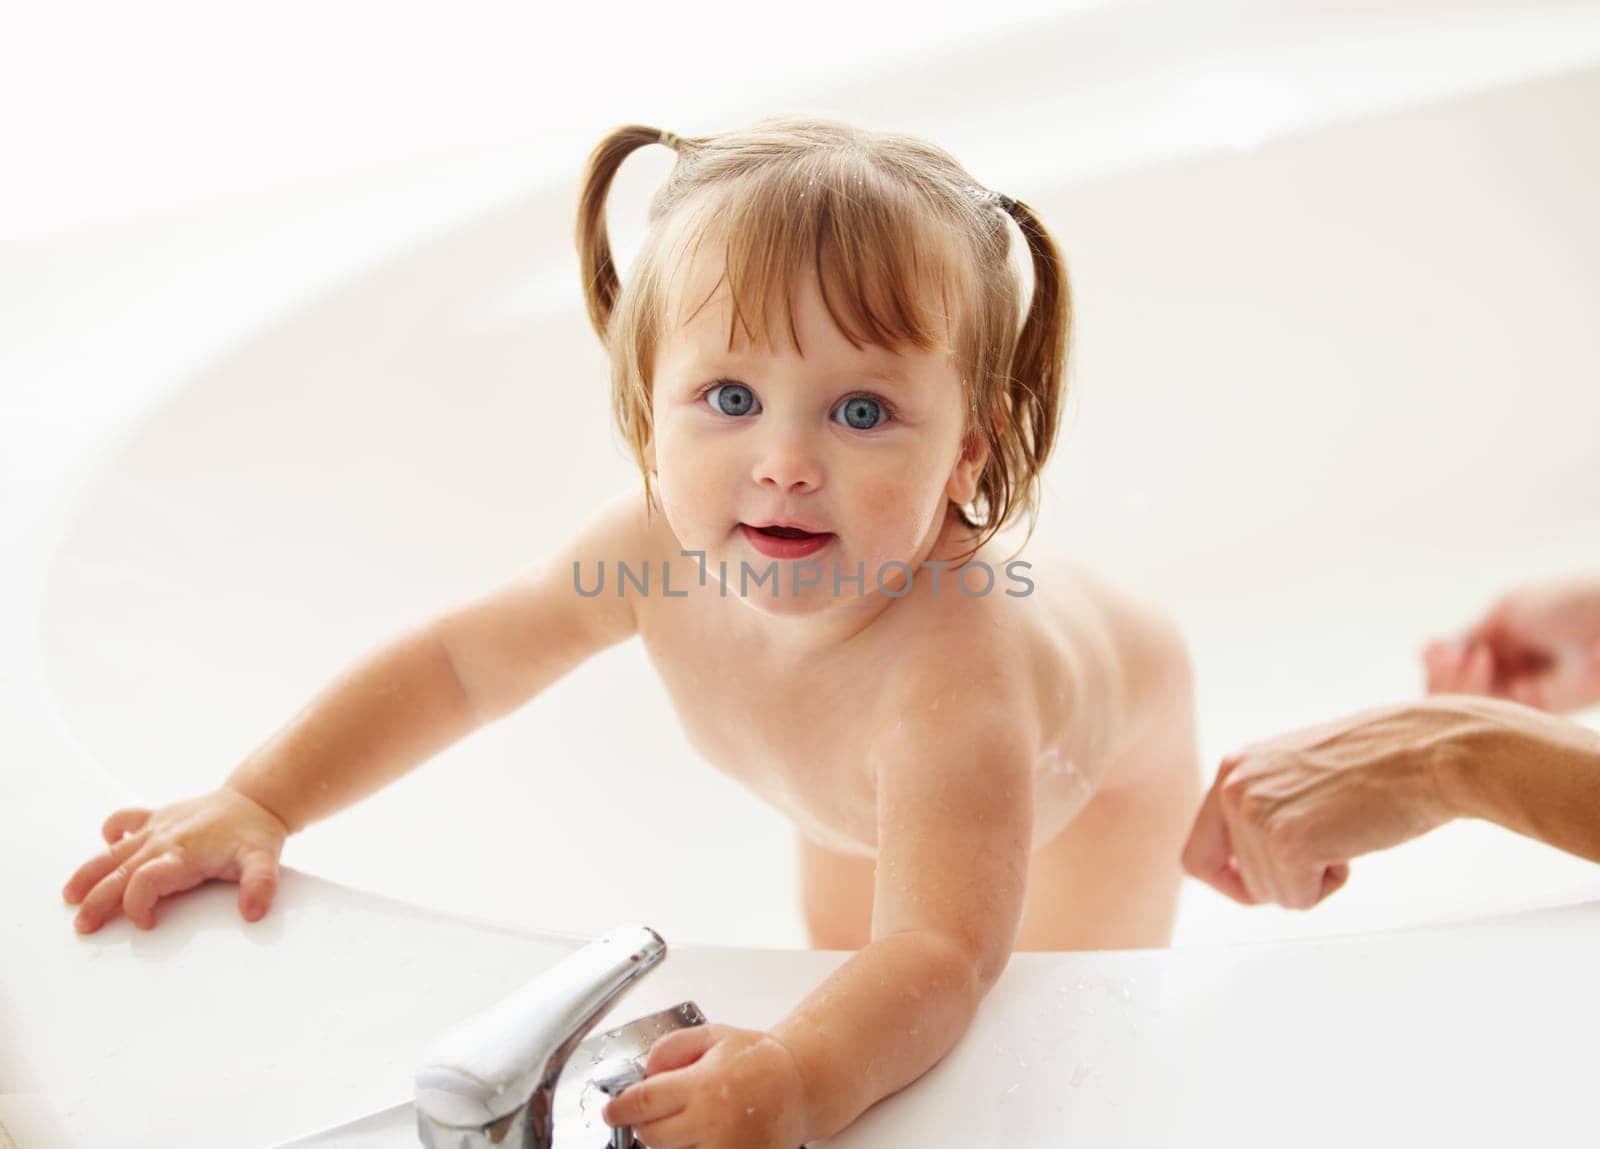 Portrait, cleaning and water with a baby in the bath for childhood hygiene or natural skincare. Children, bathroom and a happy young toddler girl in a bathtub for health and wellness in her home.